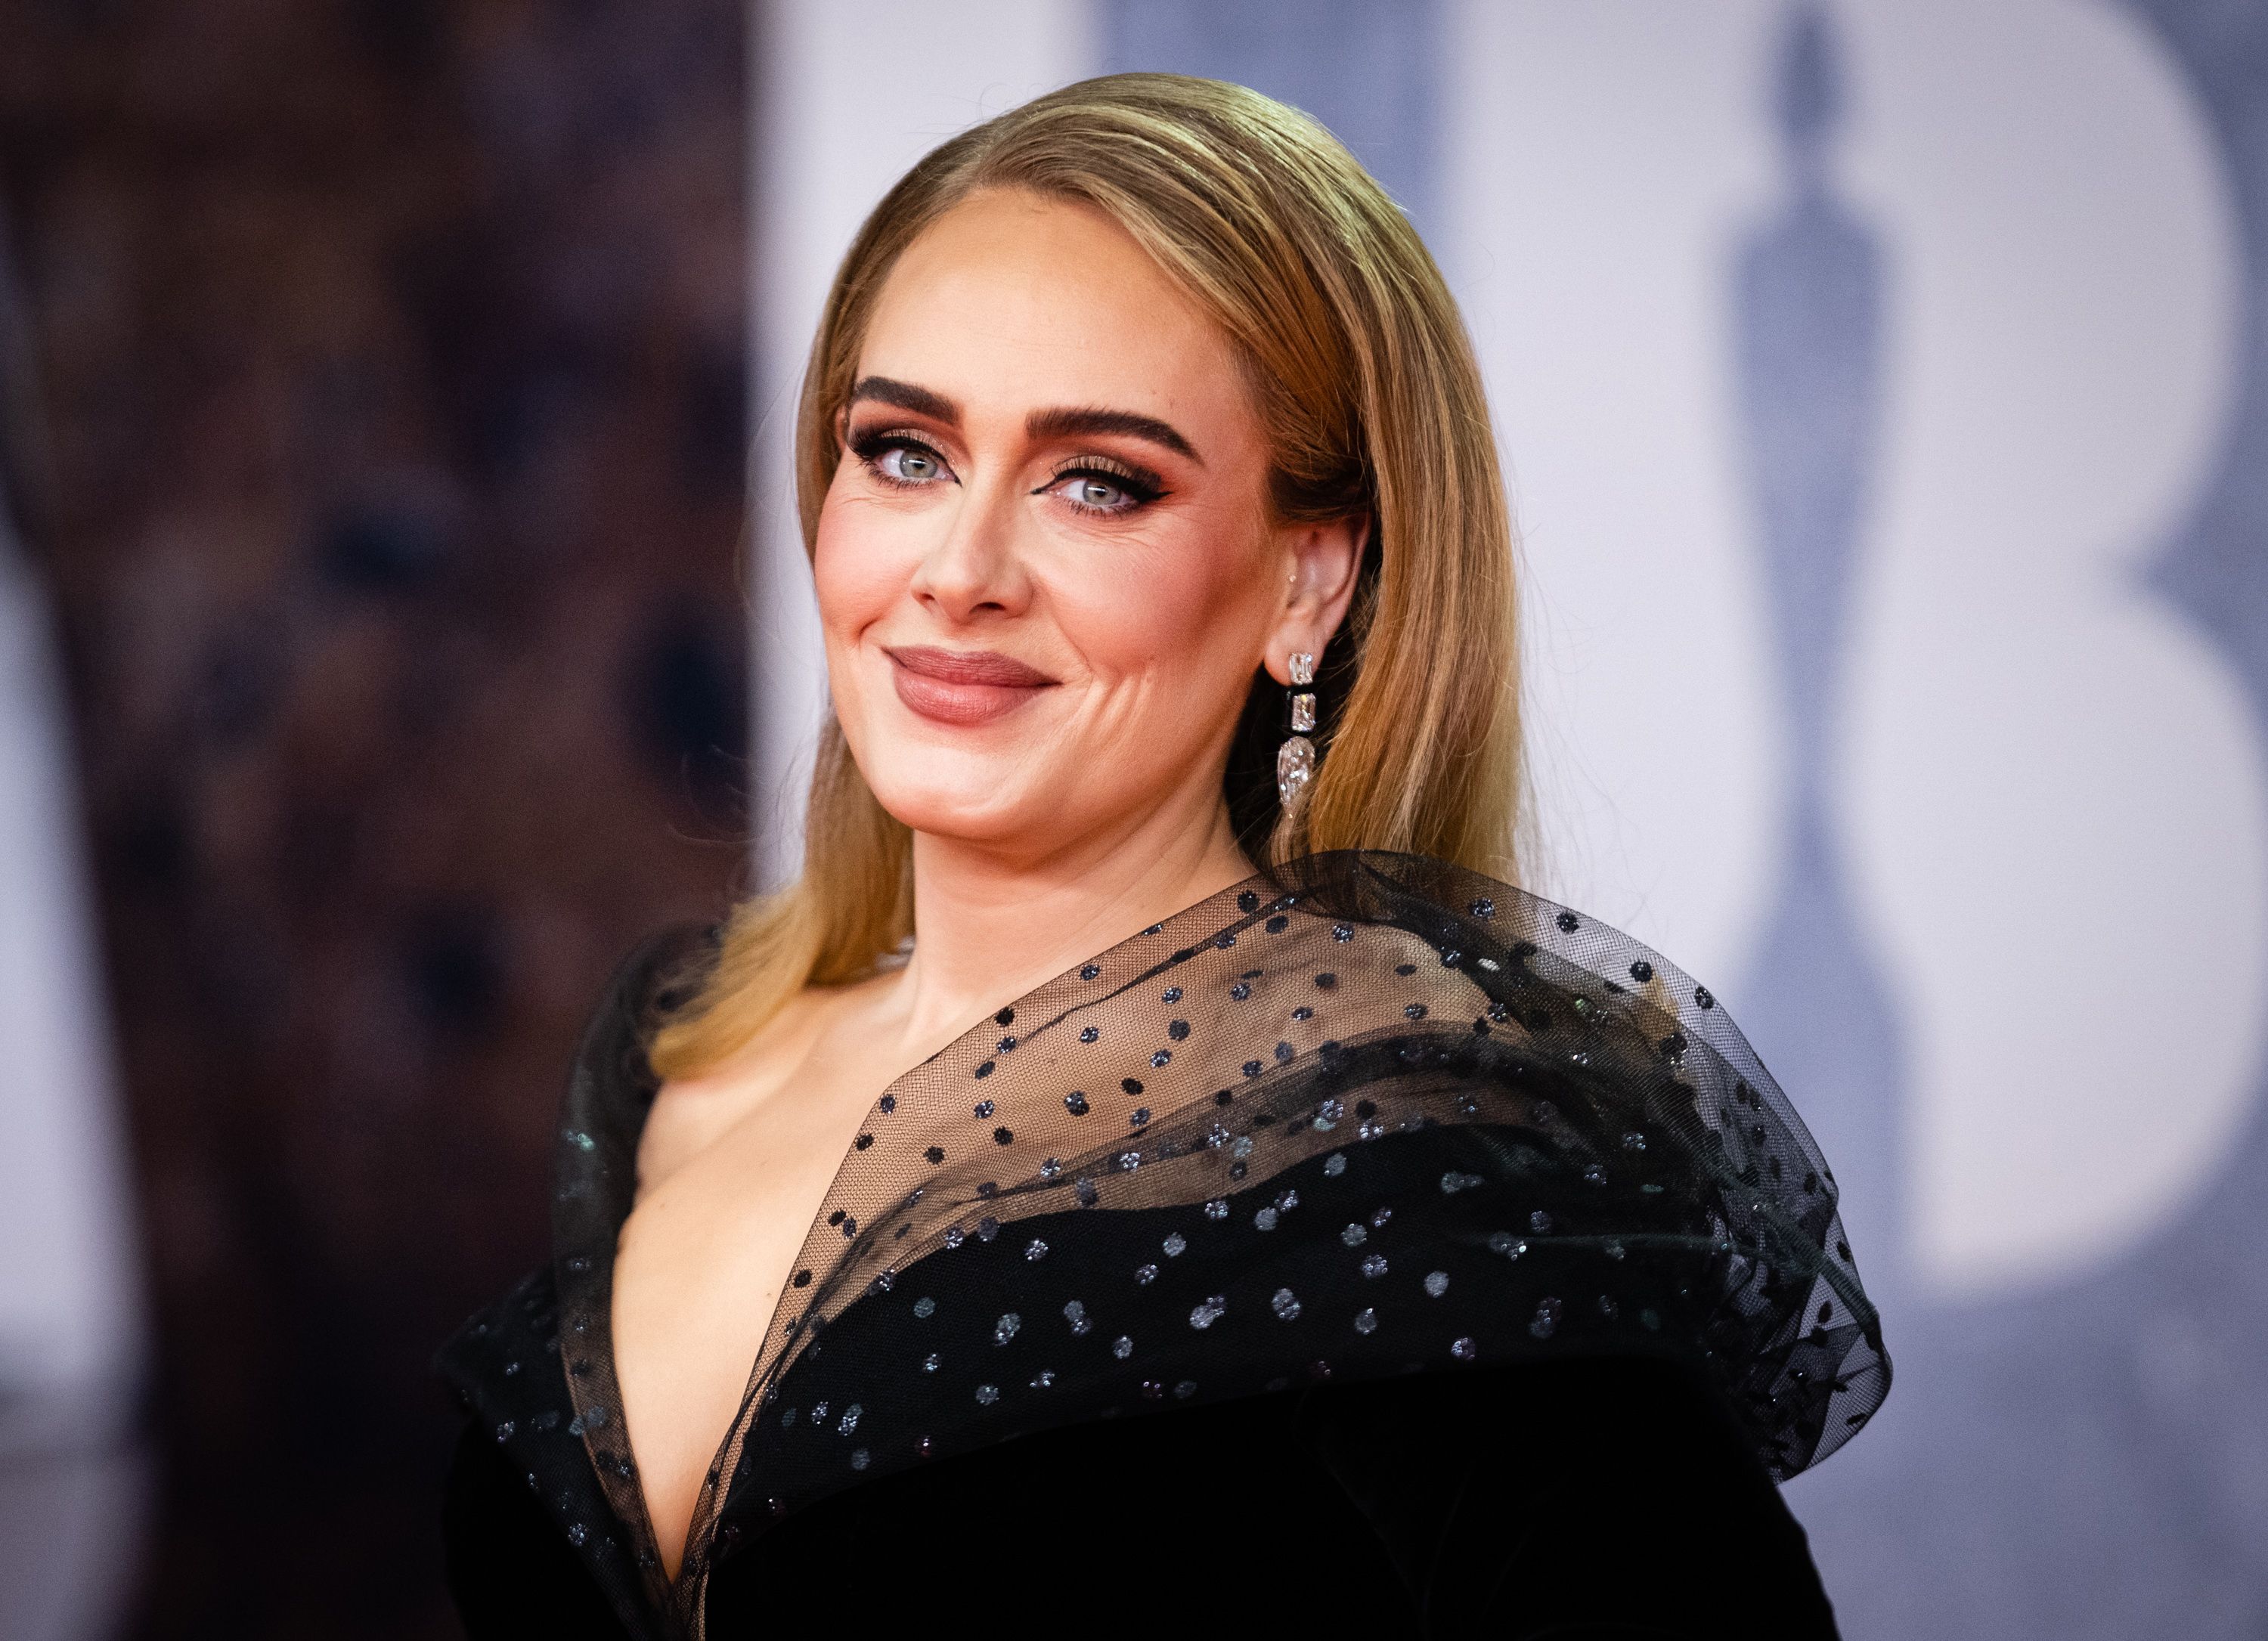 Adele shares doctor's diagnosis after nasty heat issue during Las